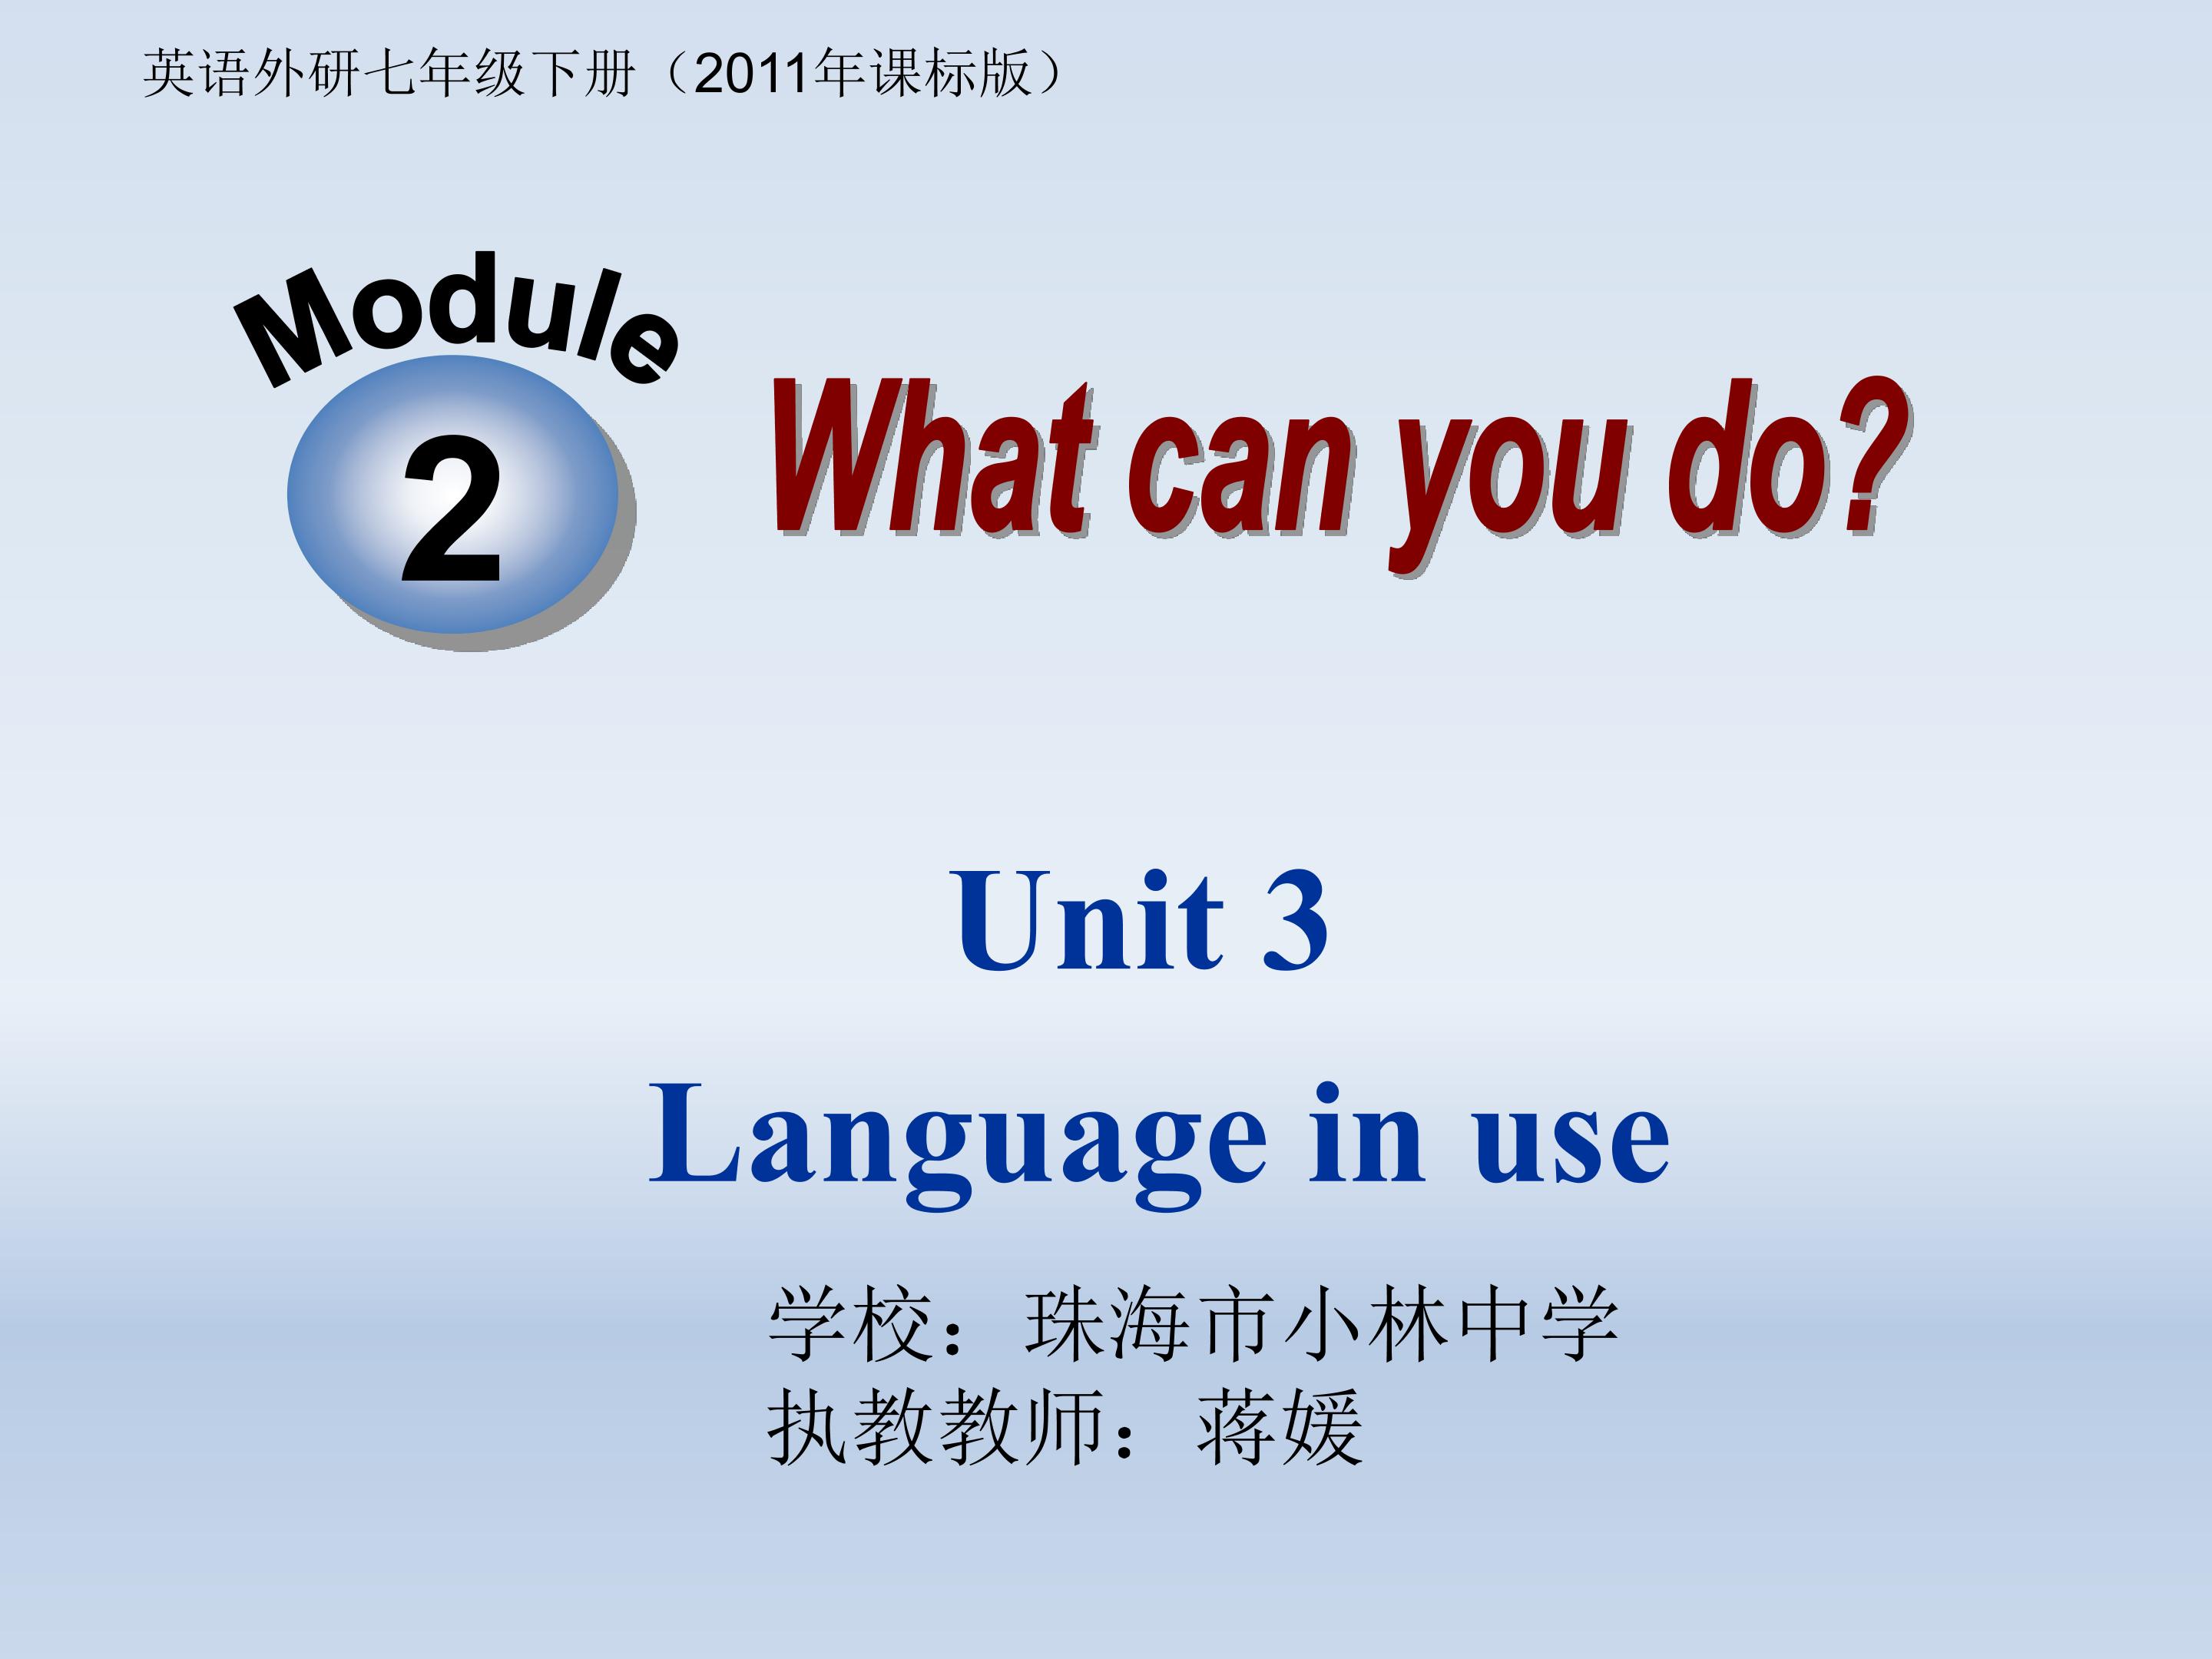 Module 2 What can you do?